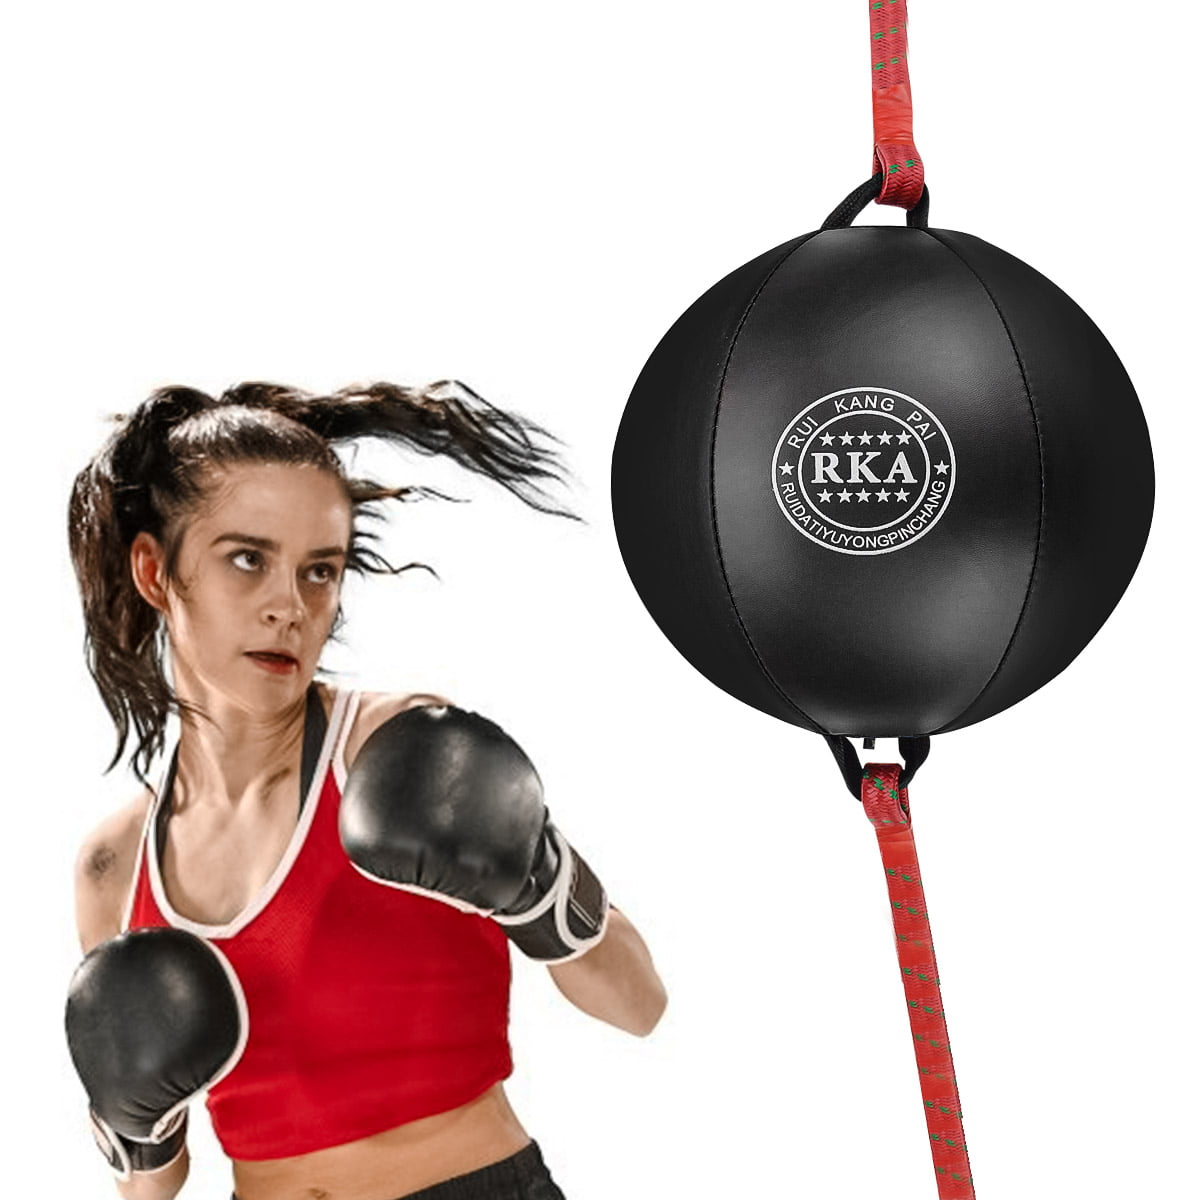 GOTOTOP Inflatable Boxing Bag Floor Punch Bag for Training Martial Arts Karate Boxing Punching Height 150 cm